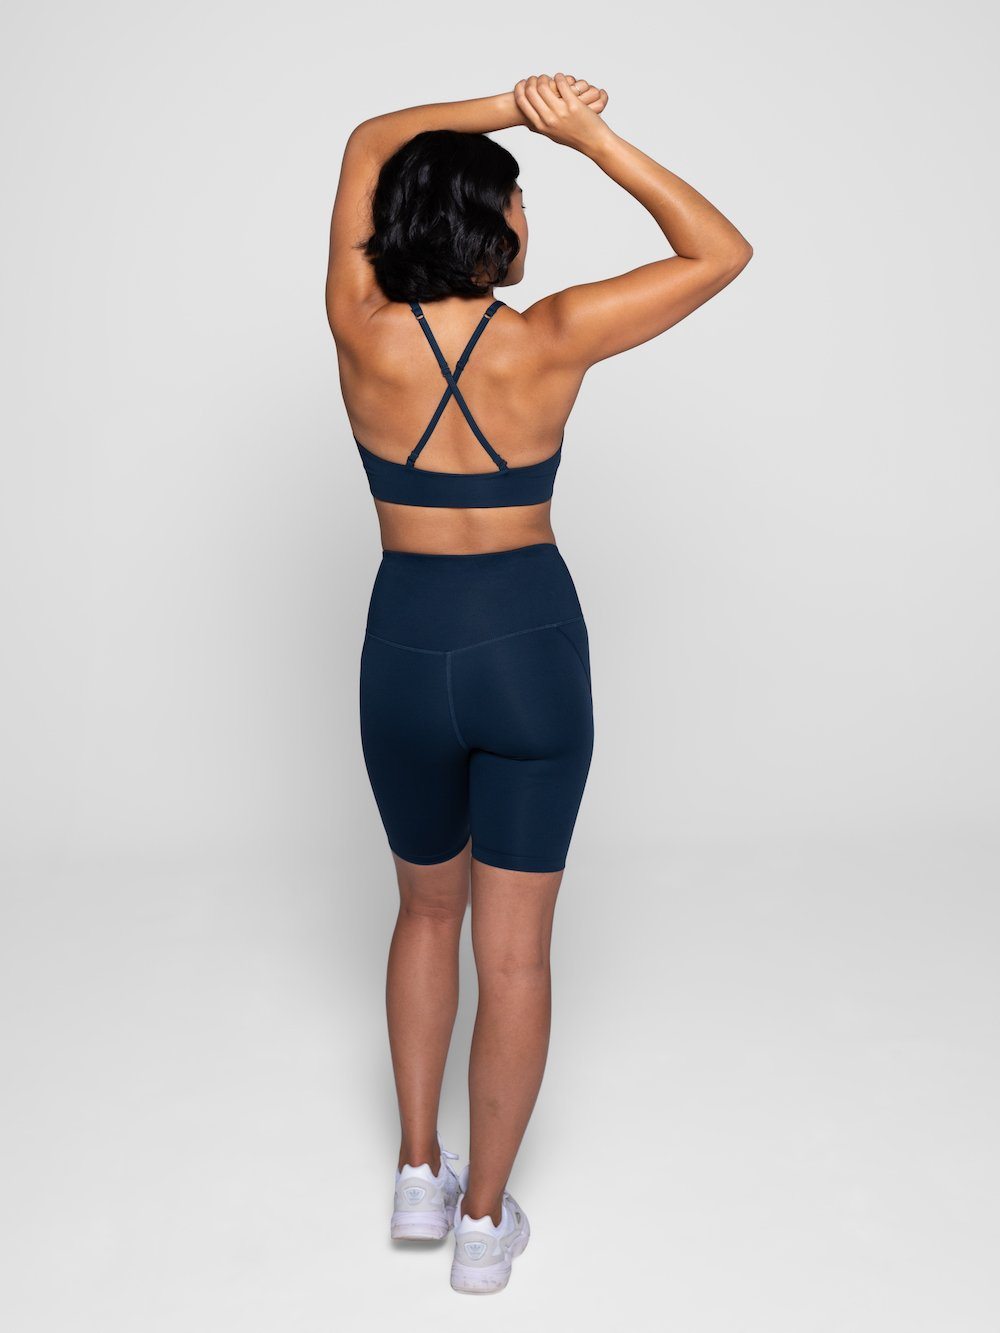 Girlfriend Collective Topanga sports Bra - Made from recycled plastic bottles Midnight Underwear